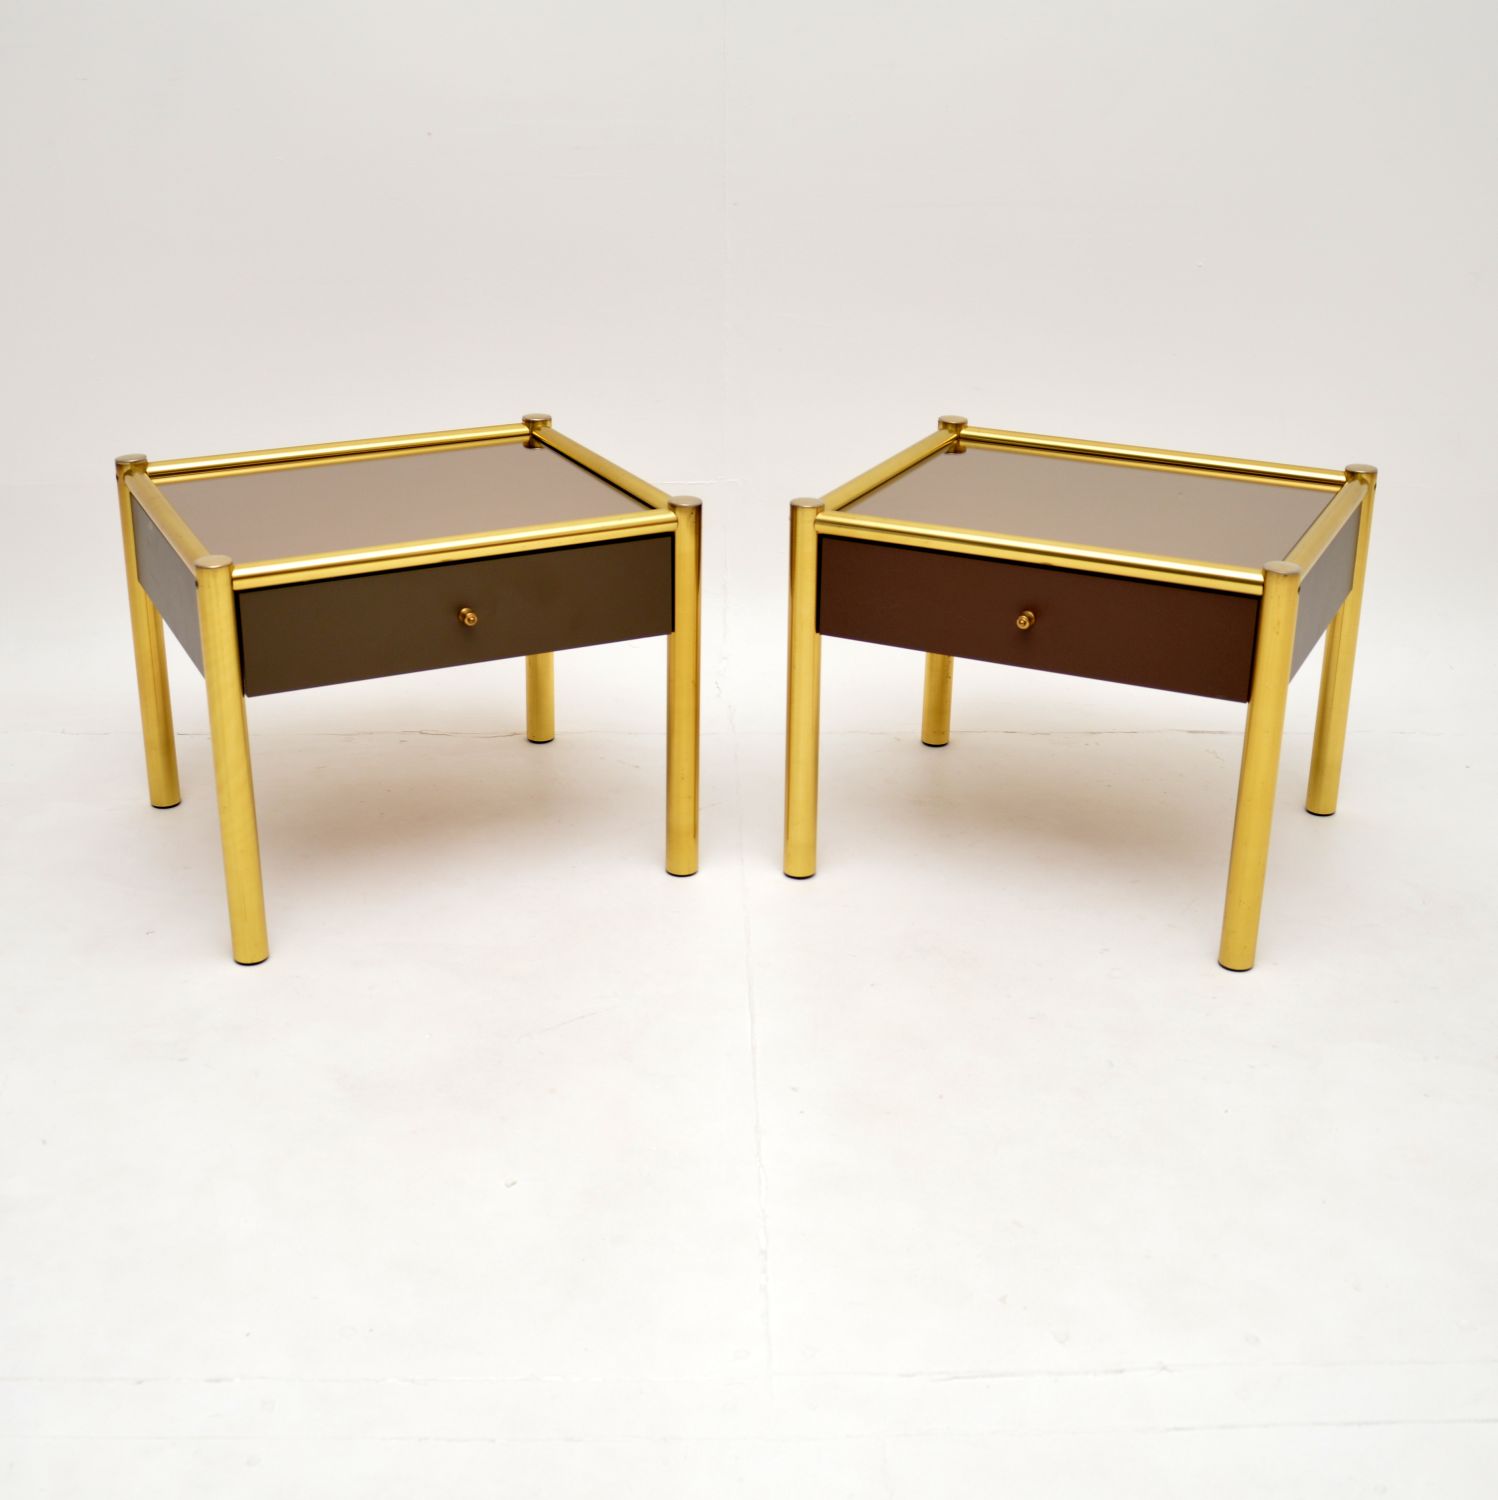 Pair of Vintage Brass and Glass Side Tables